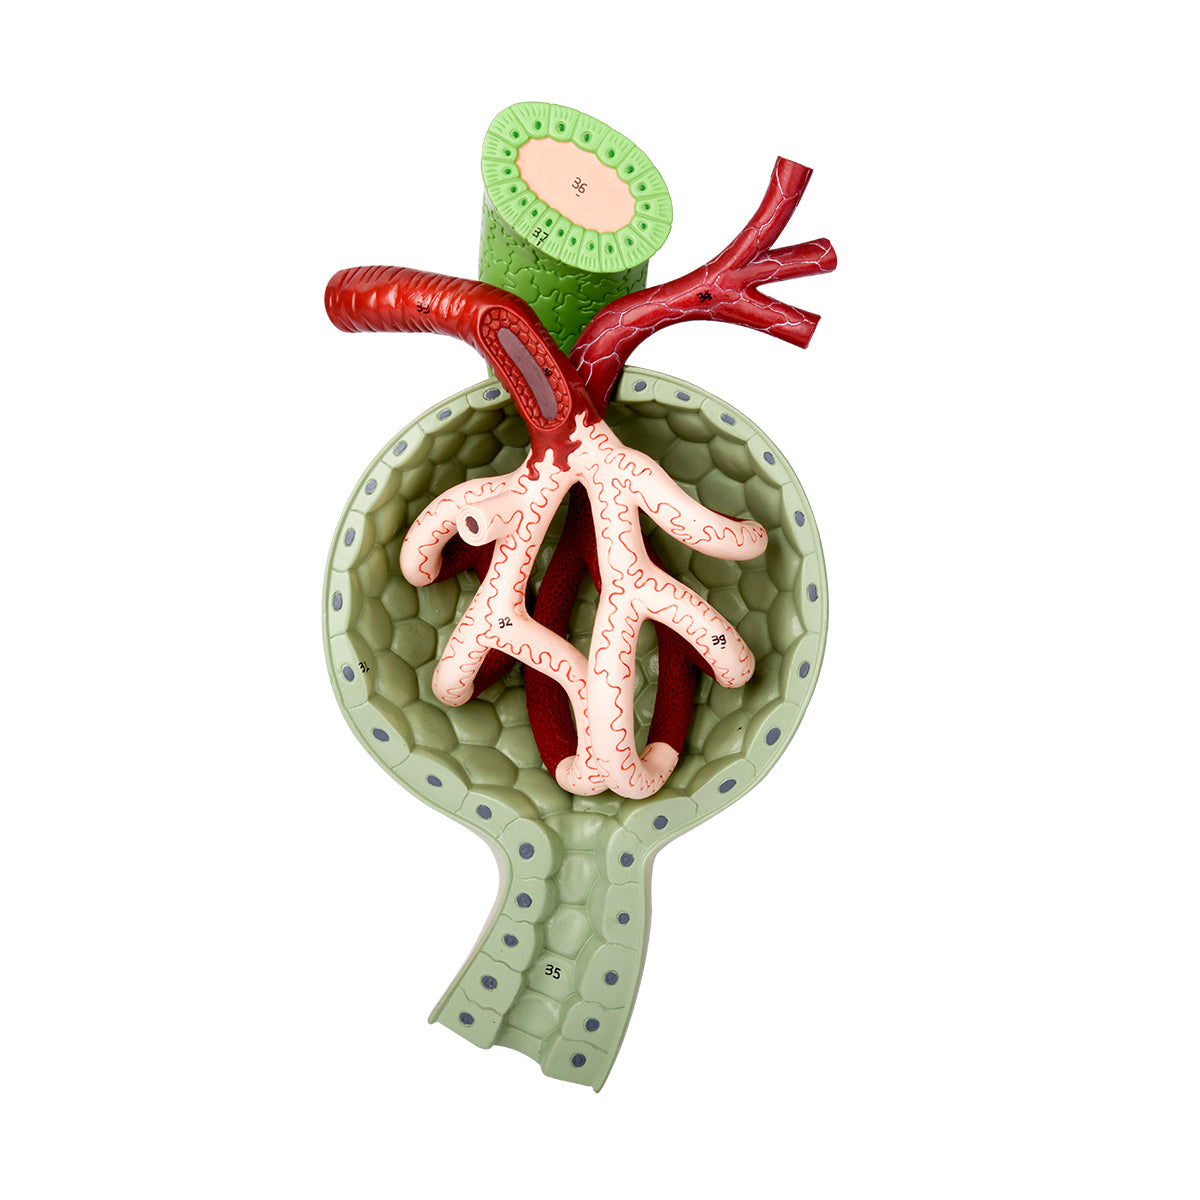 Evotech Scientific Kidney, Nephron and Renal Corpuscle Model